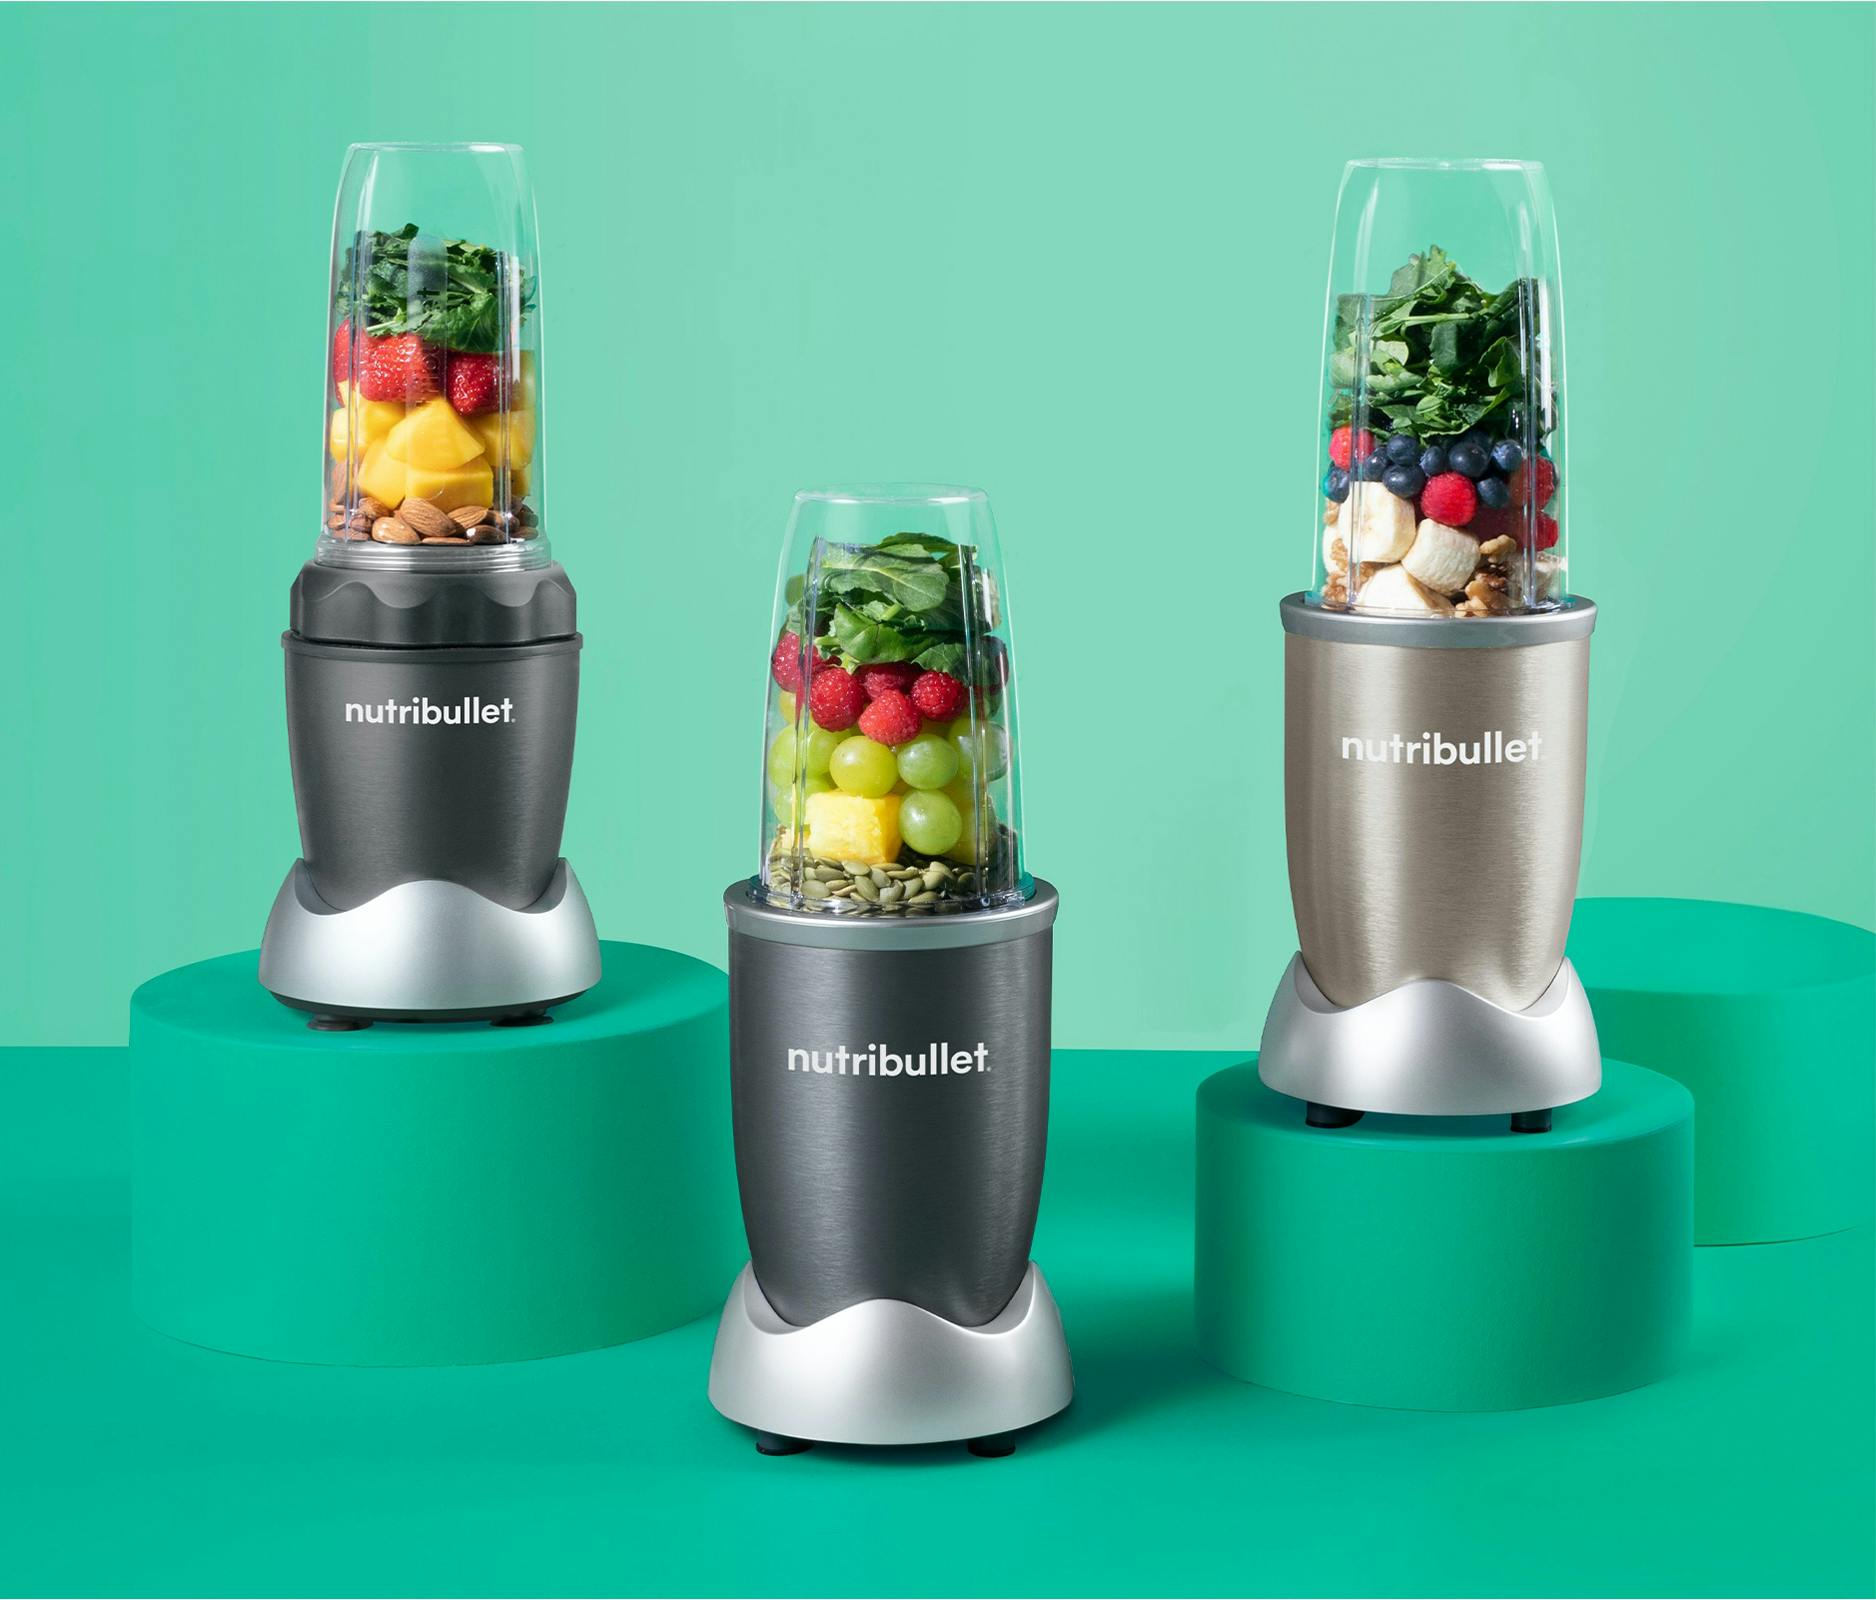 2x Extra+1x Pre-installed in blade with lips Compatible with 600W//900W Blenders Nutribullet Blender Replacement Parts 1 Blender Cross Blades /& 3 gaskets